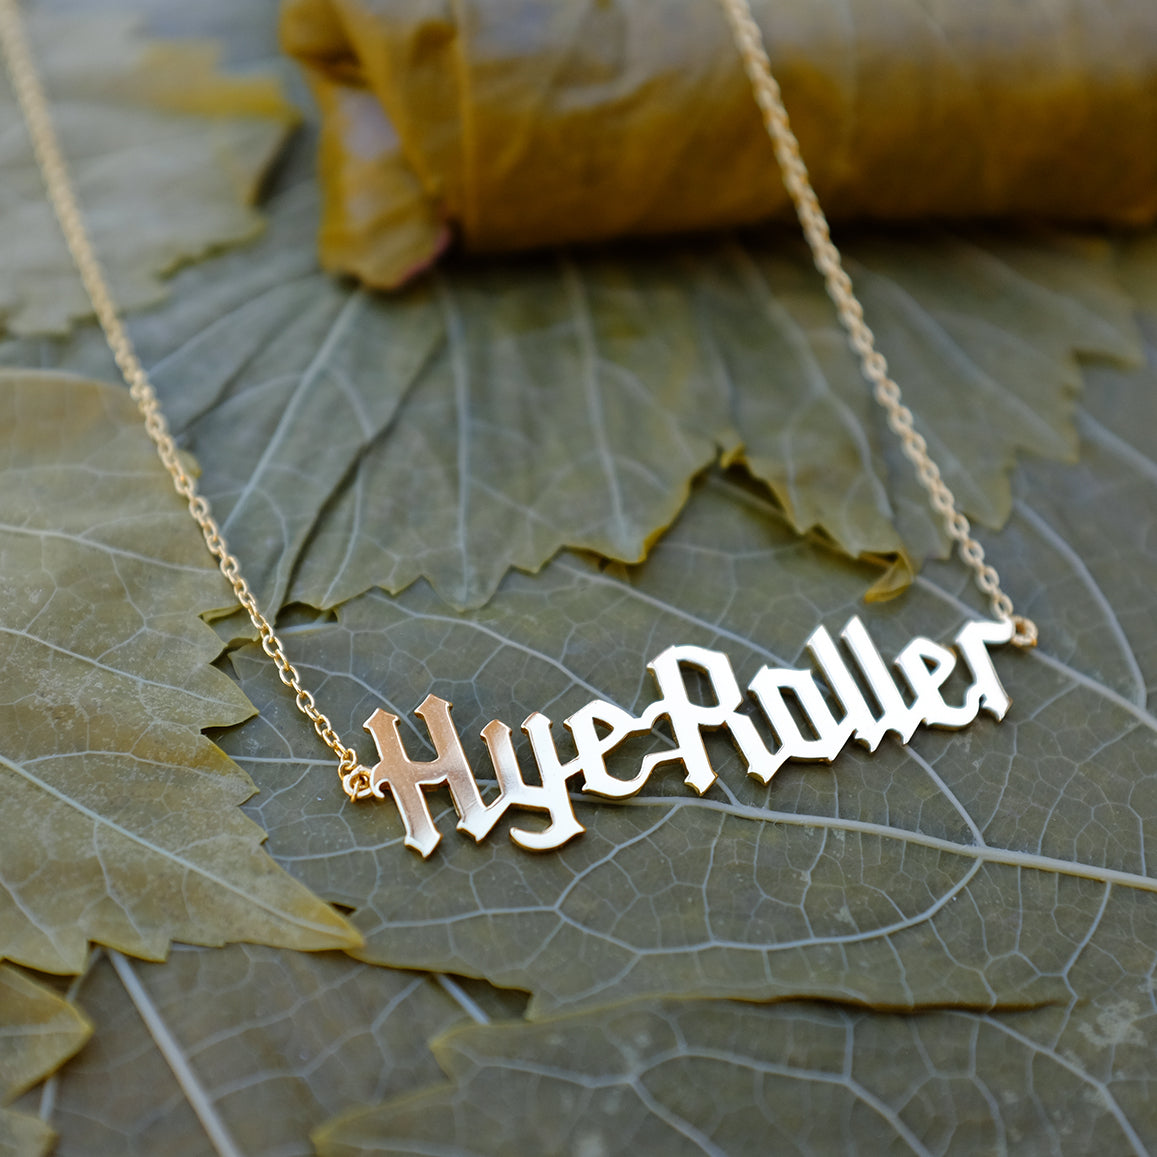 Gold Plated Sterling Silver Hye Roller Necklace